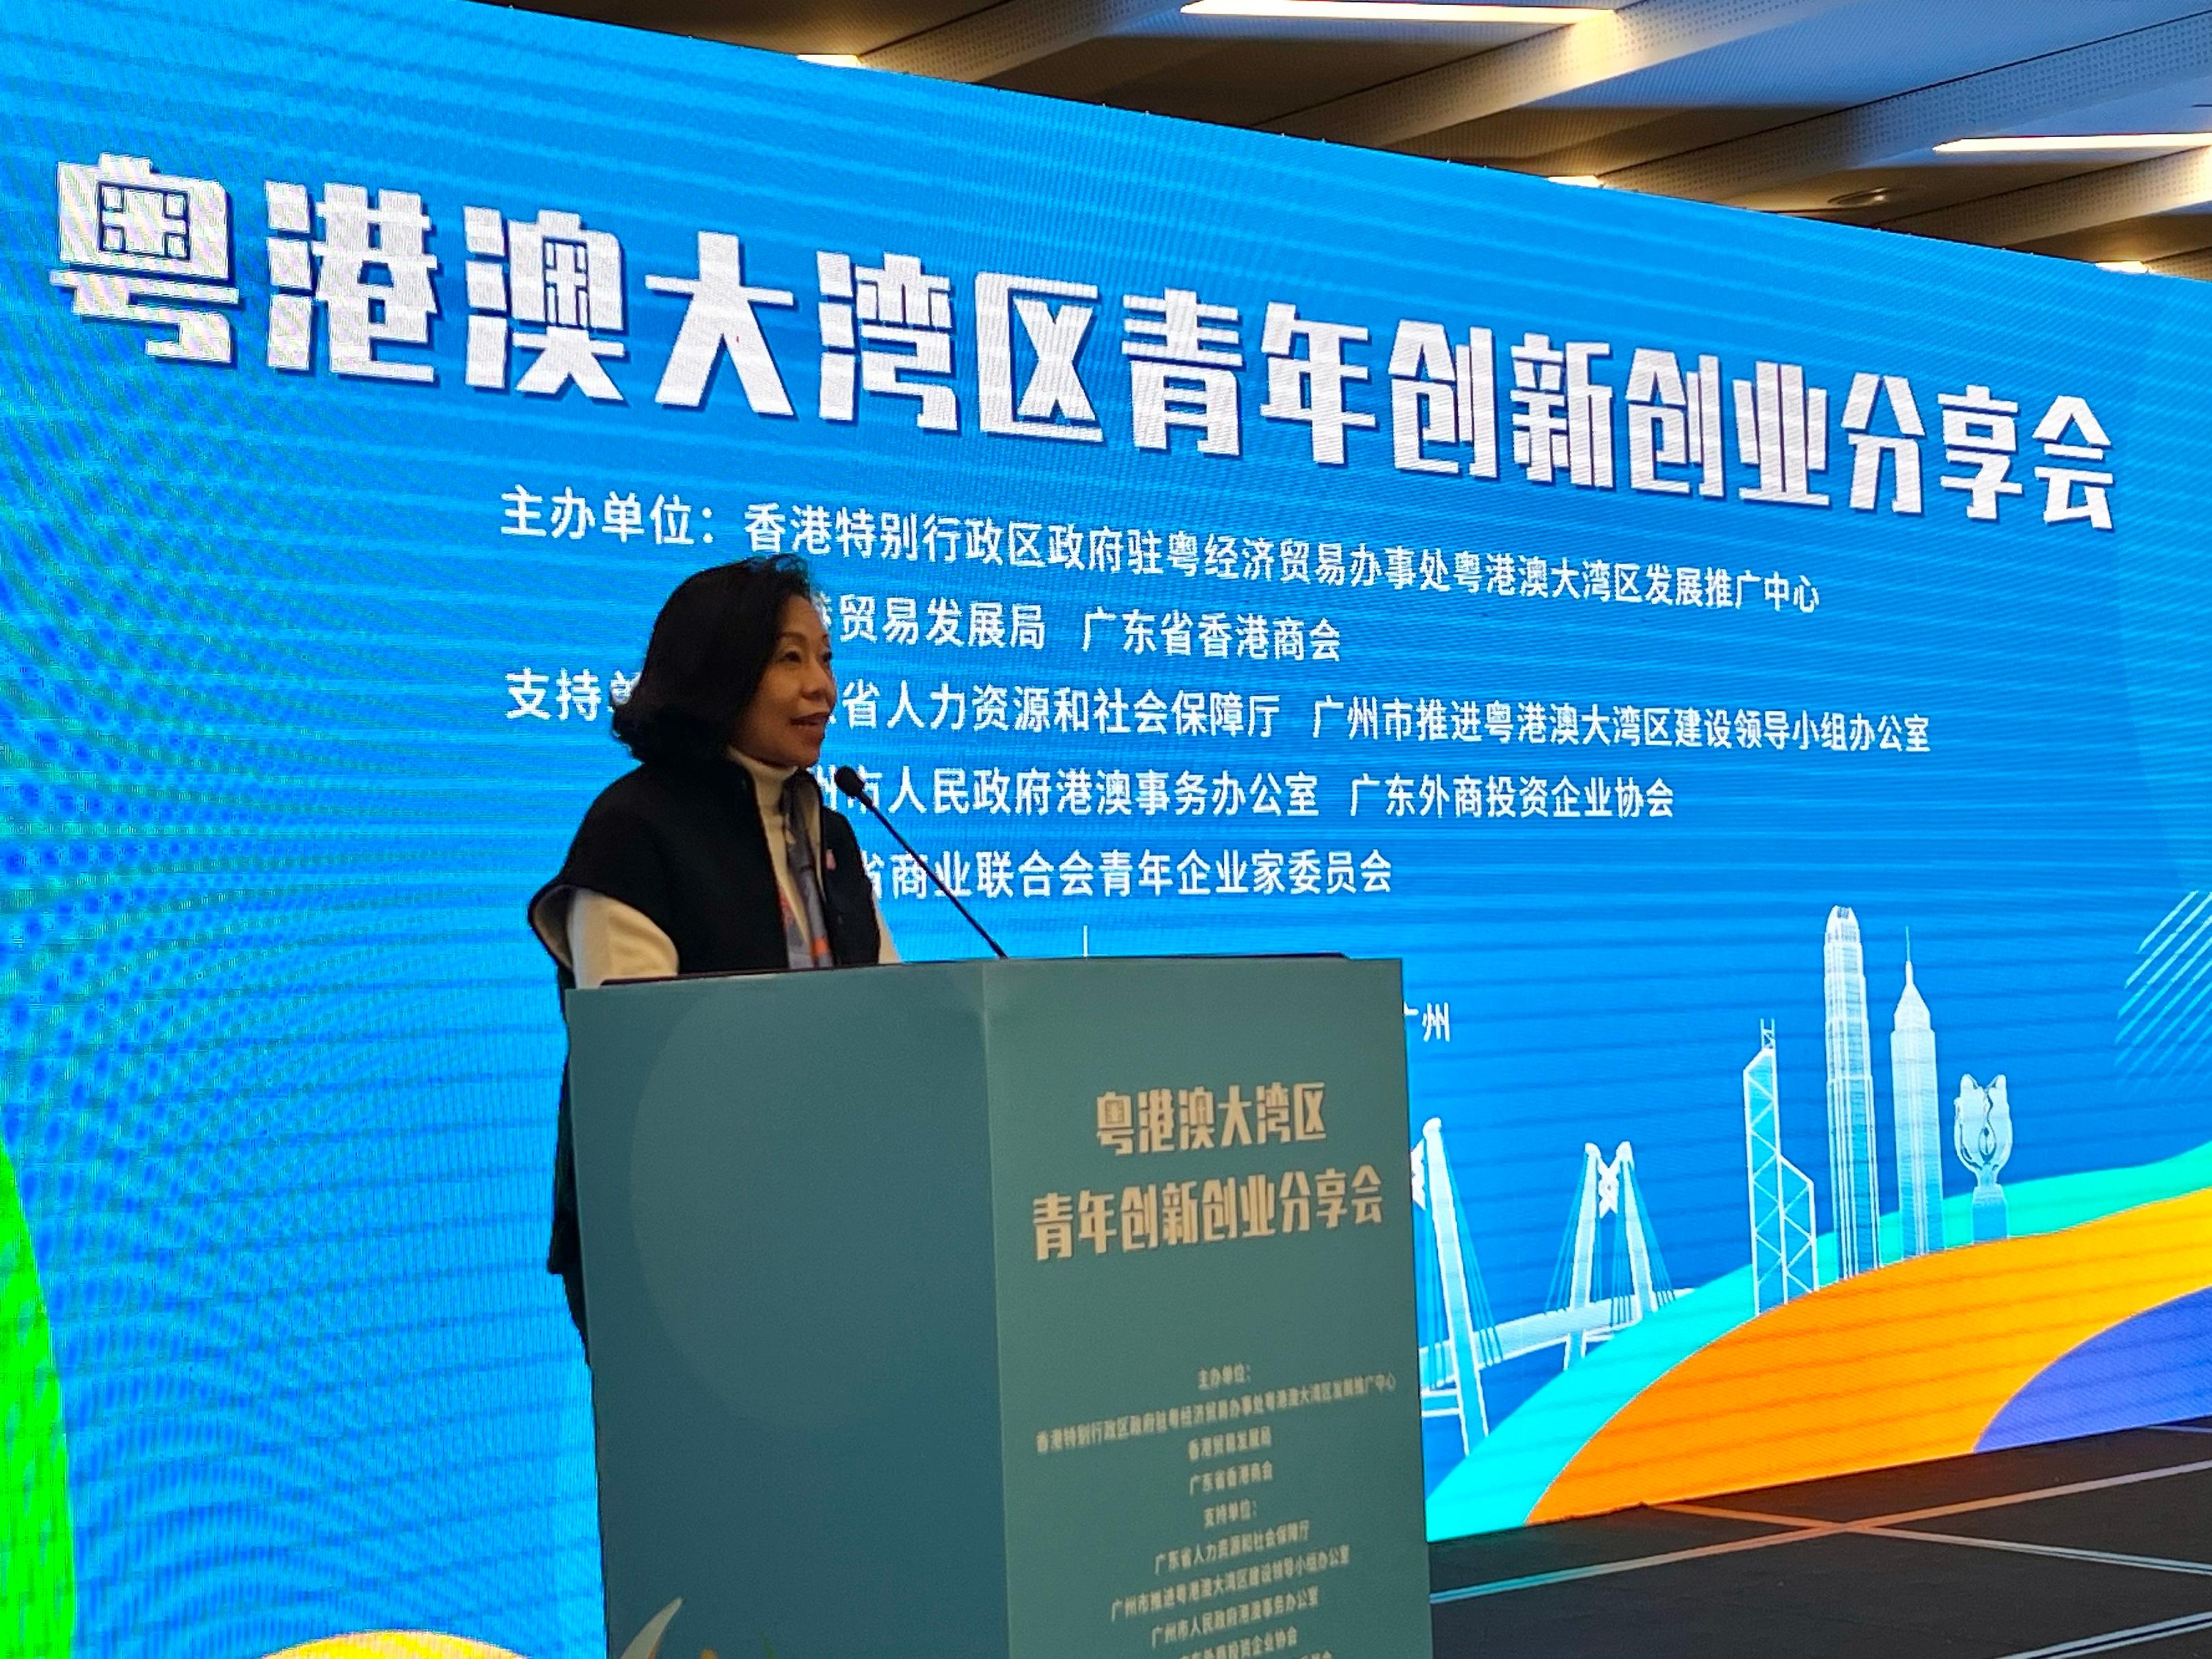 The Secretary for Home and Youth Affairs, Miss Alice Mak, attended a sharing session regarding Guangdong-Hong Kong-Macao Greater Bay Area youth innovation and entrepreneurship today (March 1). Photo shows Miss Mak delivering a speech at the sharing session.